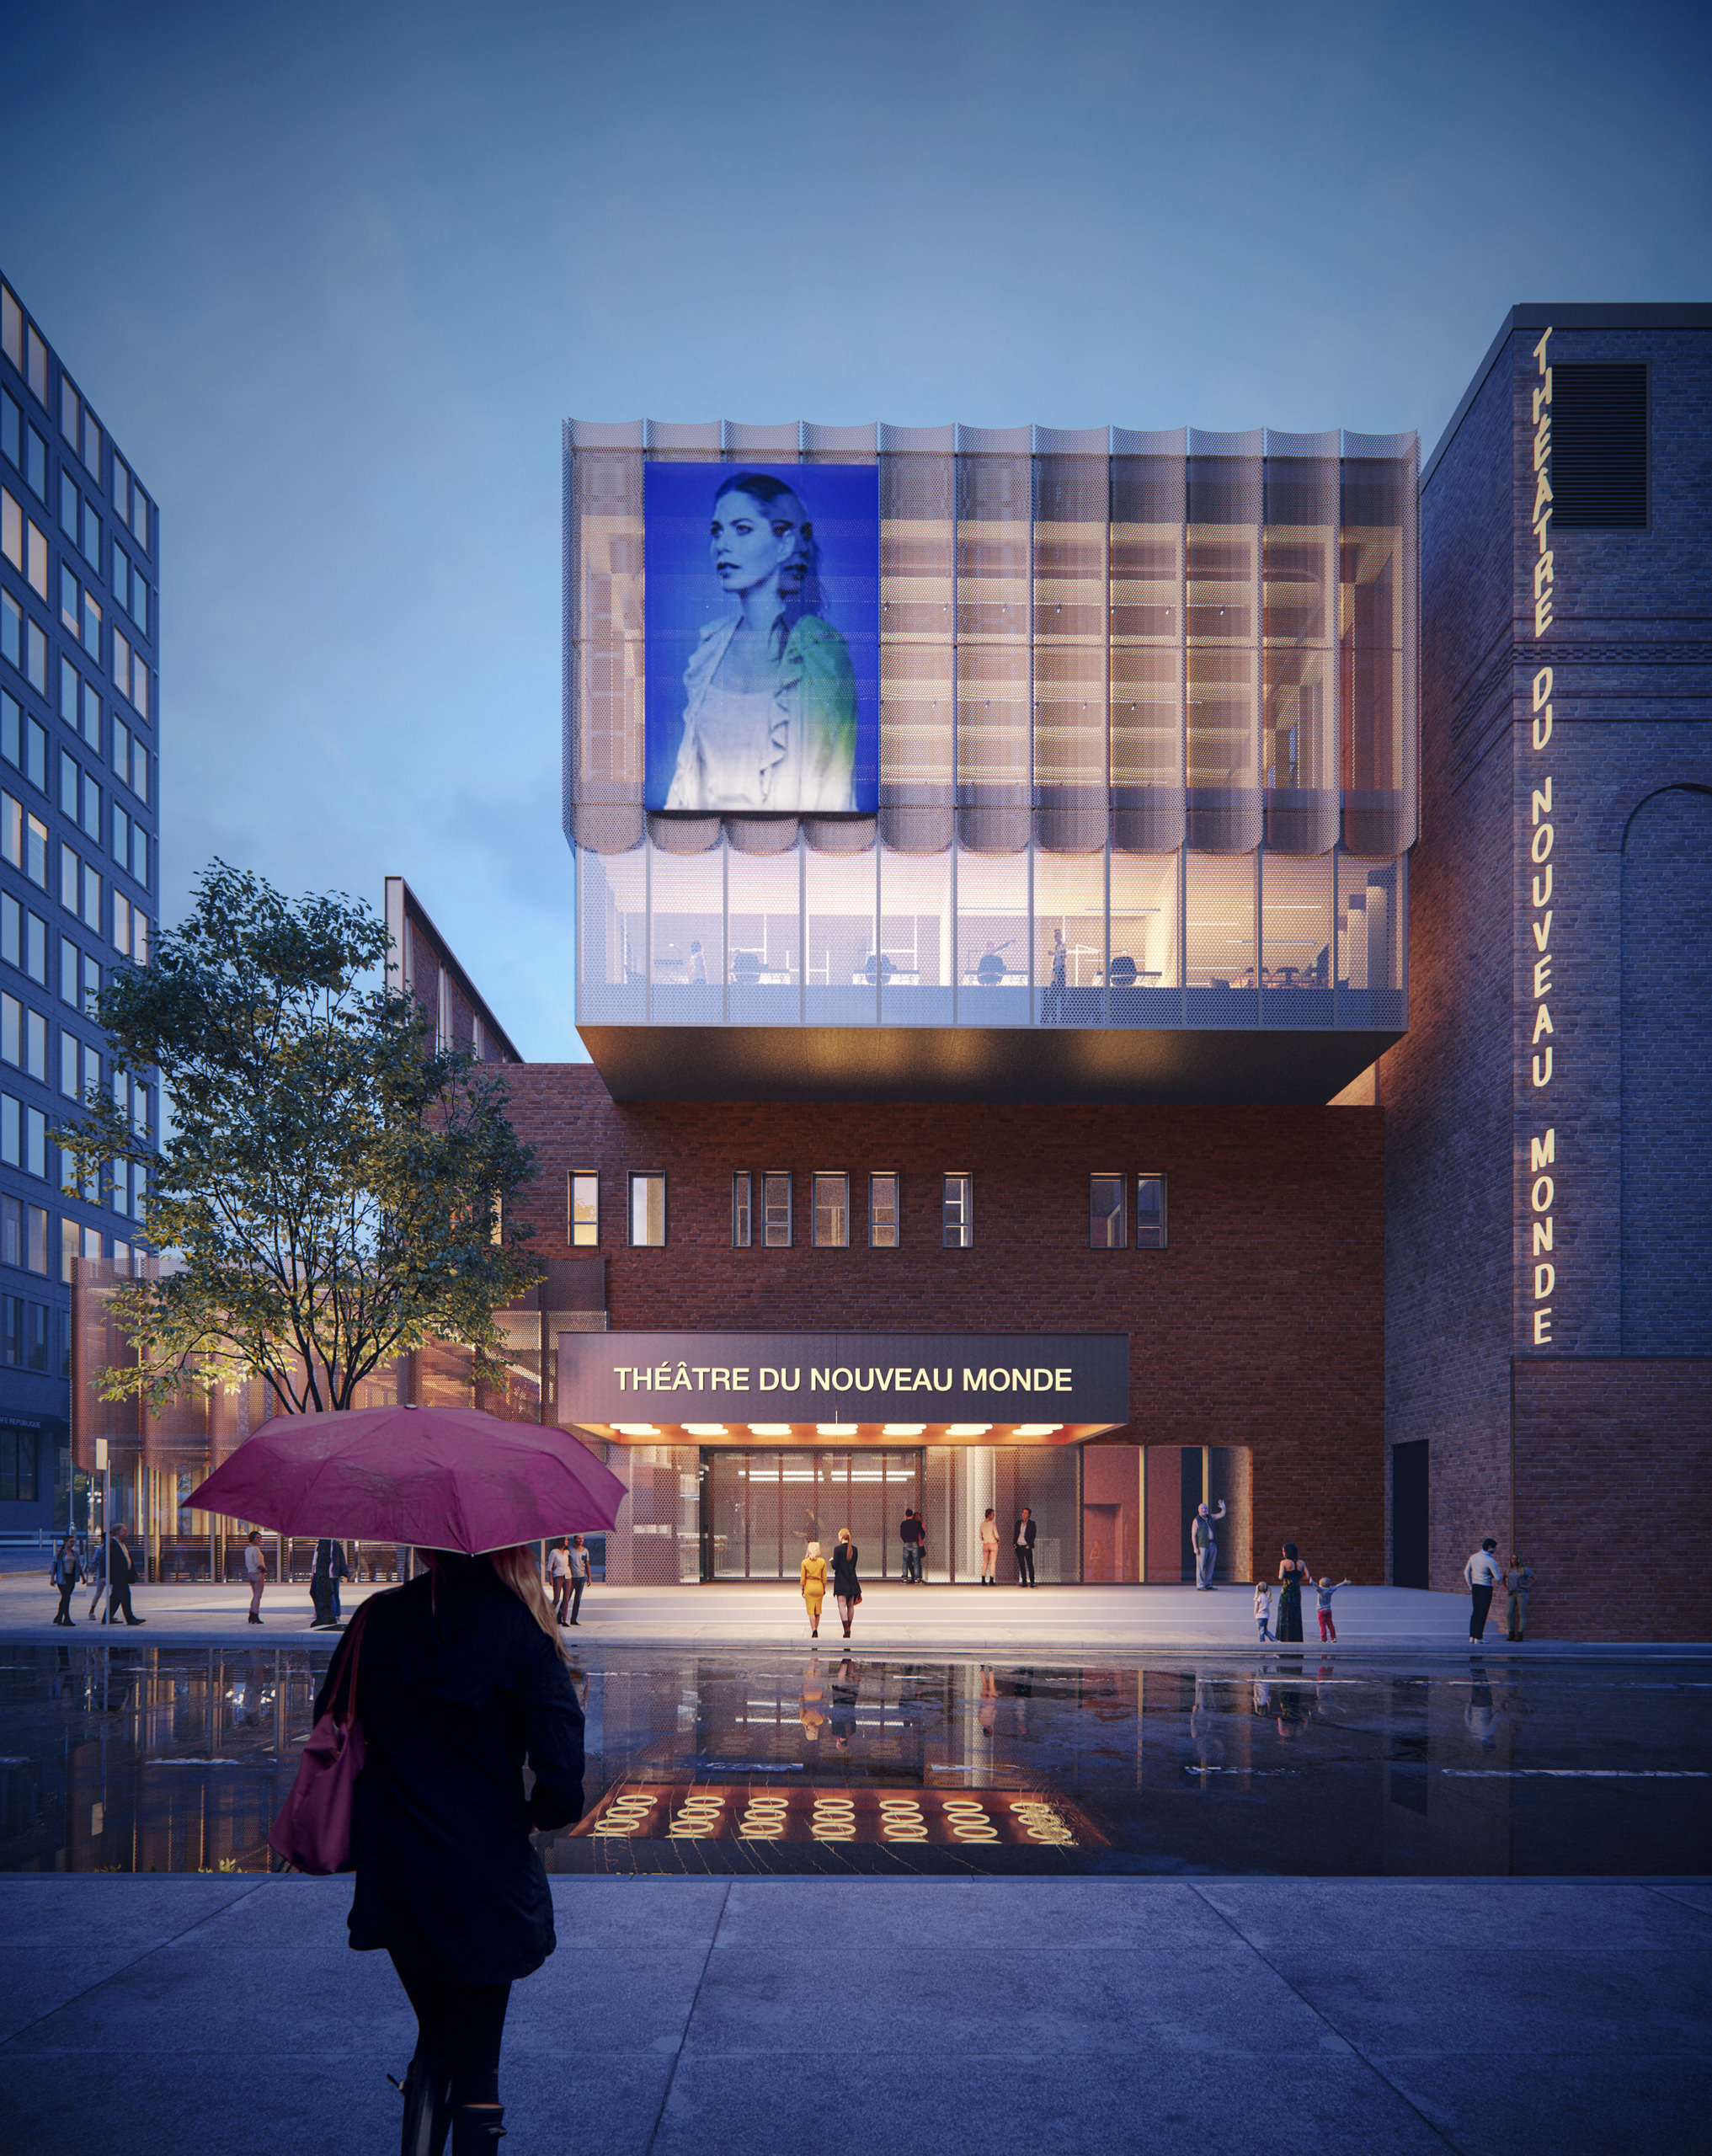 Rainy 3D architectural rendering of the theatre building with people rushing in to see the new play